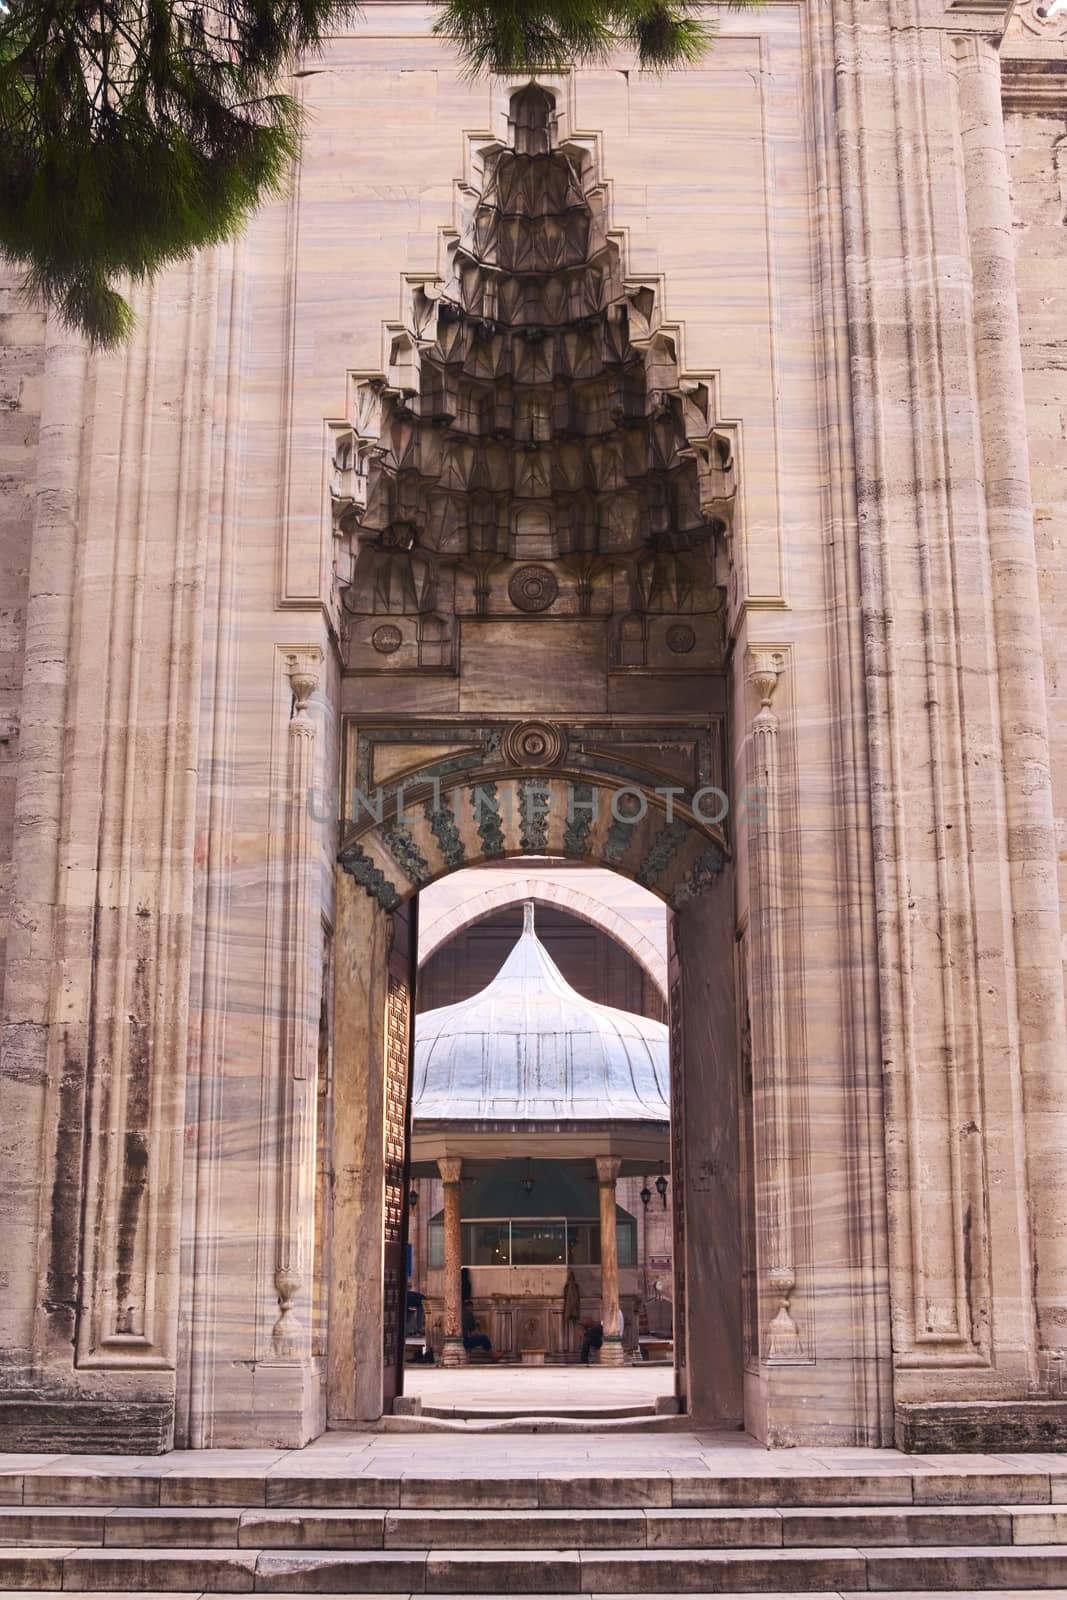 Entrance gate of the Sehzade Mosque in Istanbul, Turkey. Islamic art, architectural detail. by hernan_hyper